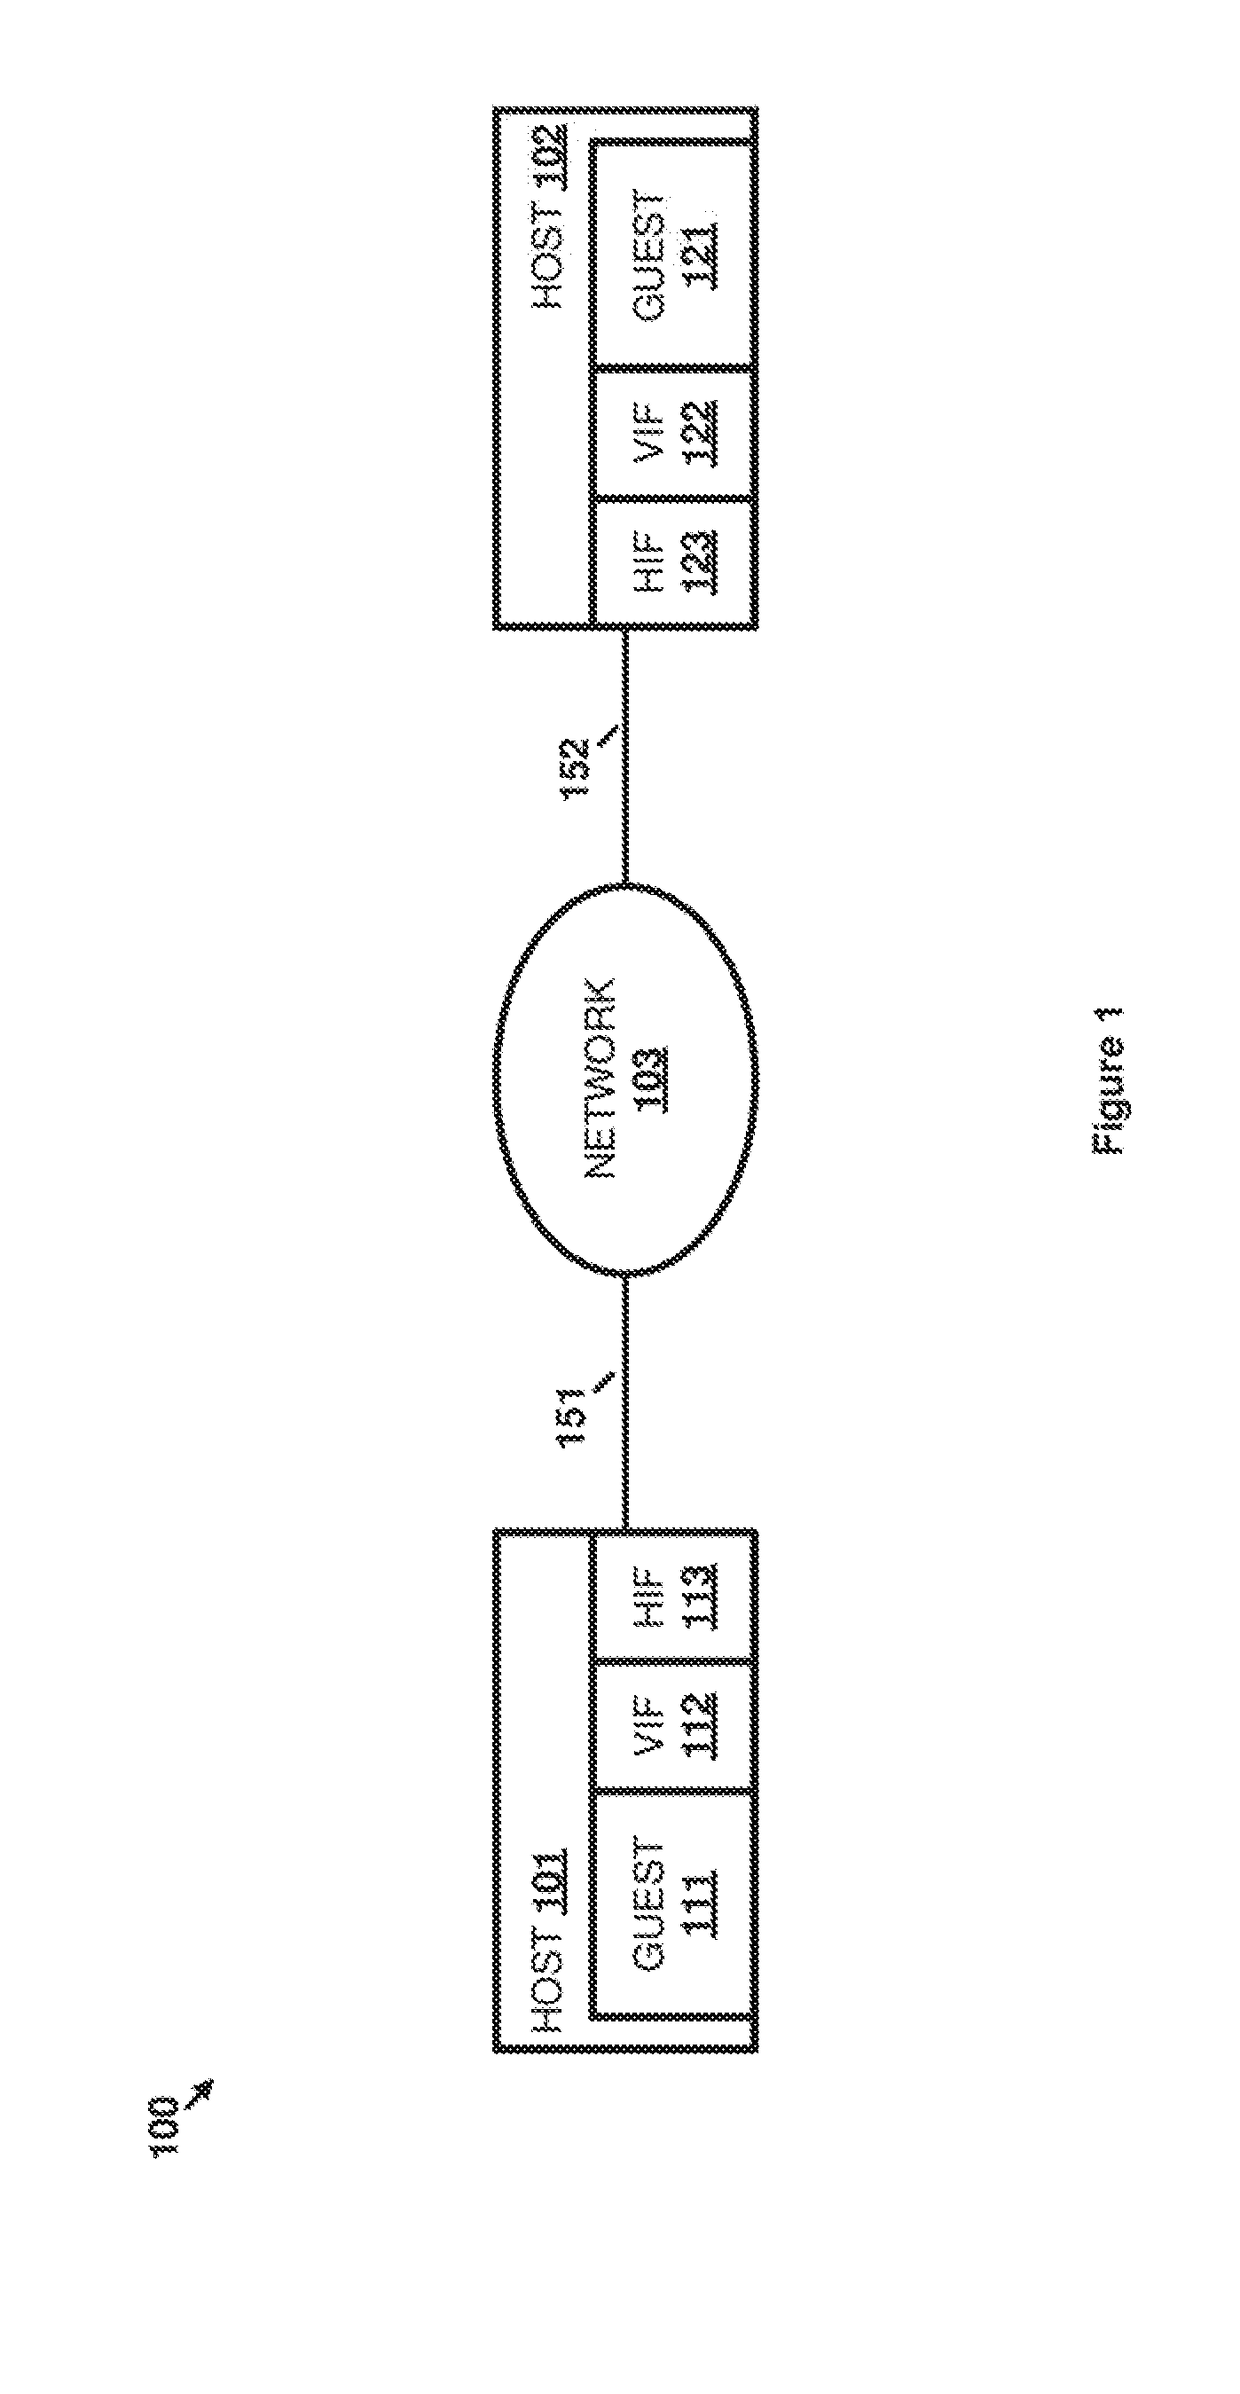 Reduction in secure protocol overhead when transferring packets between hosts